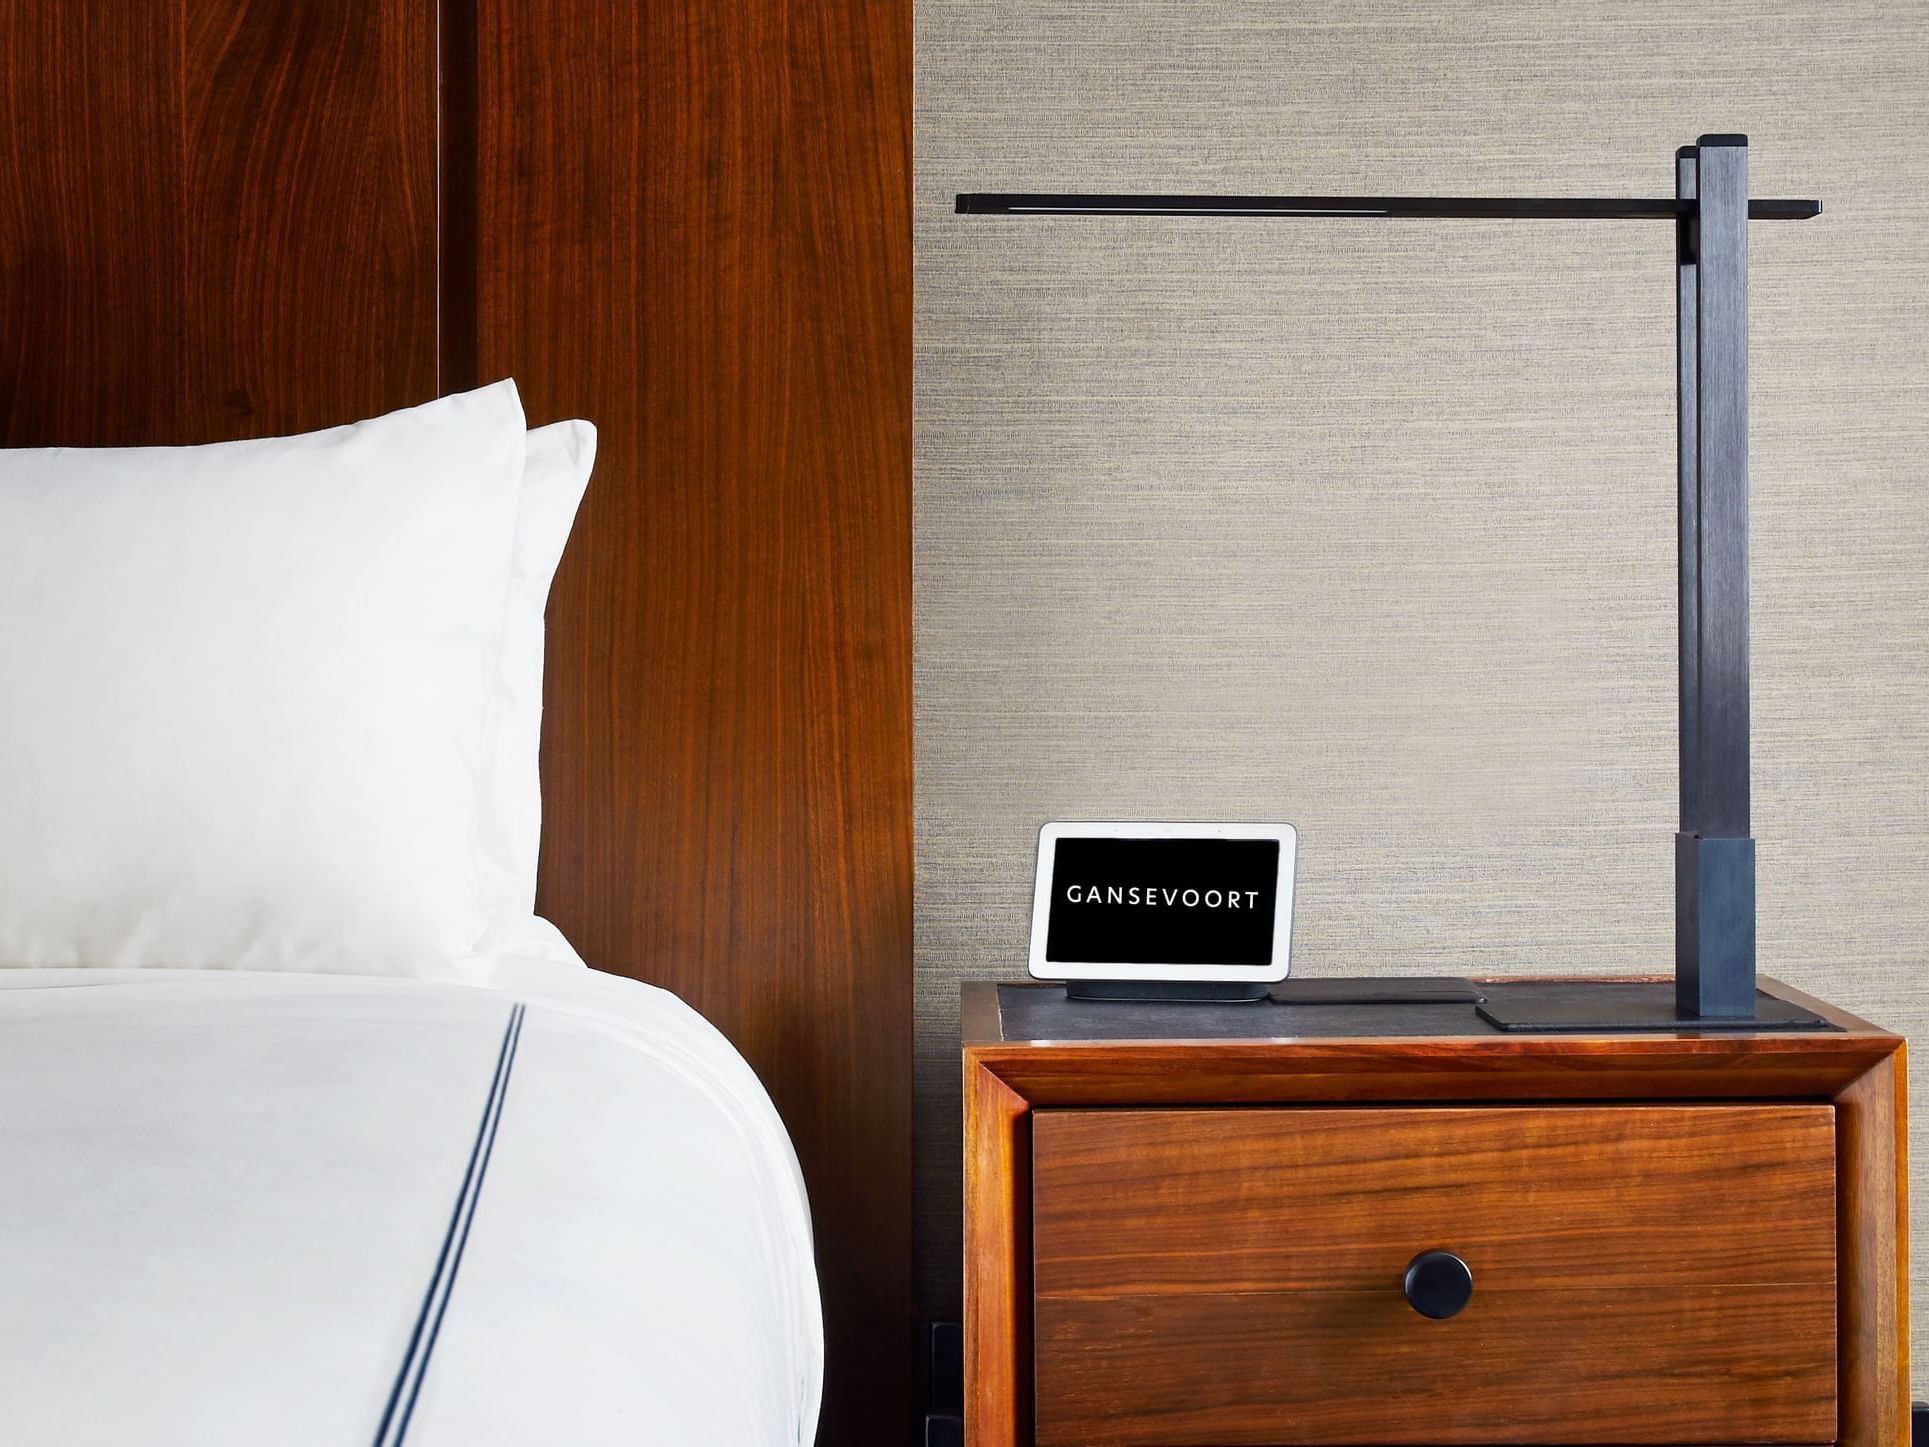 Nightstand in Accessible Superior Room at Gansevoort Hotel